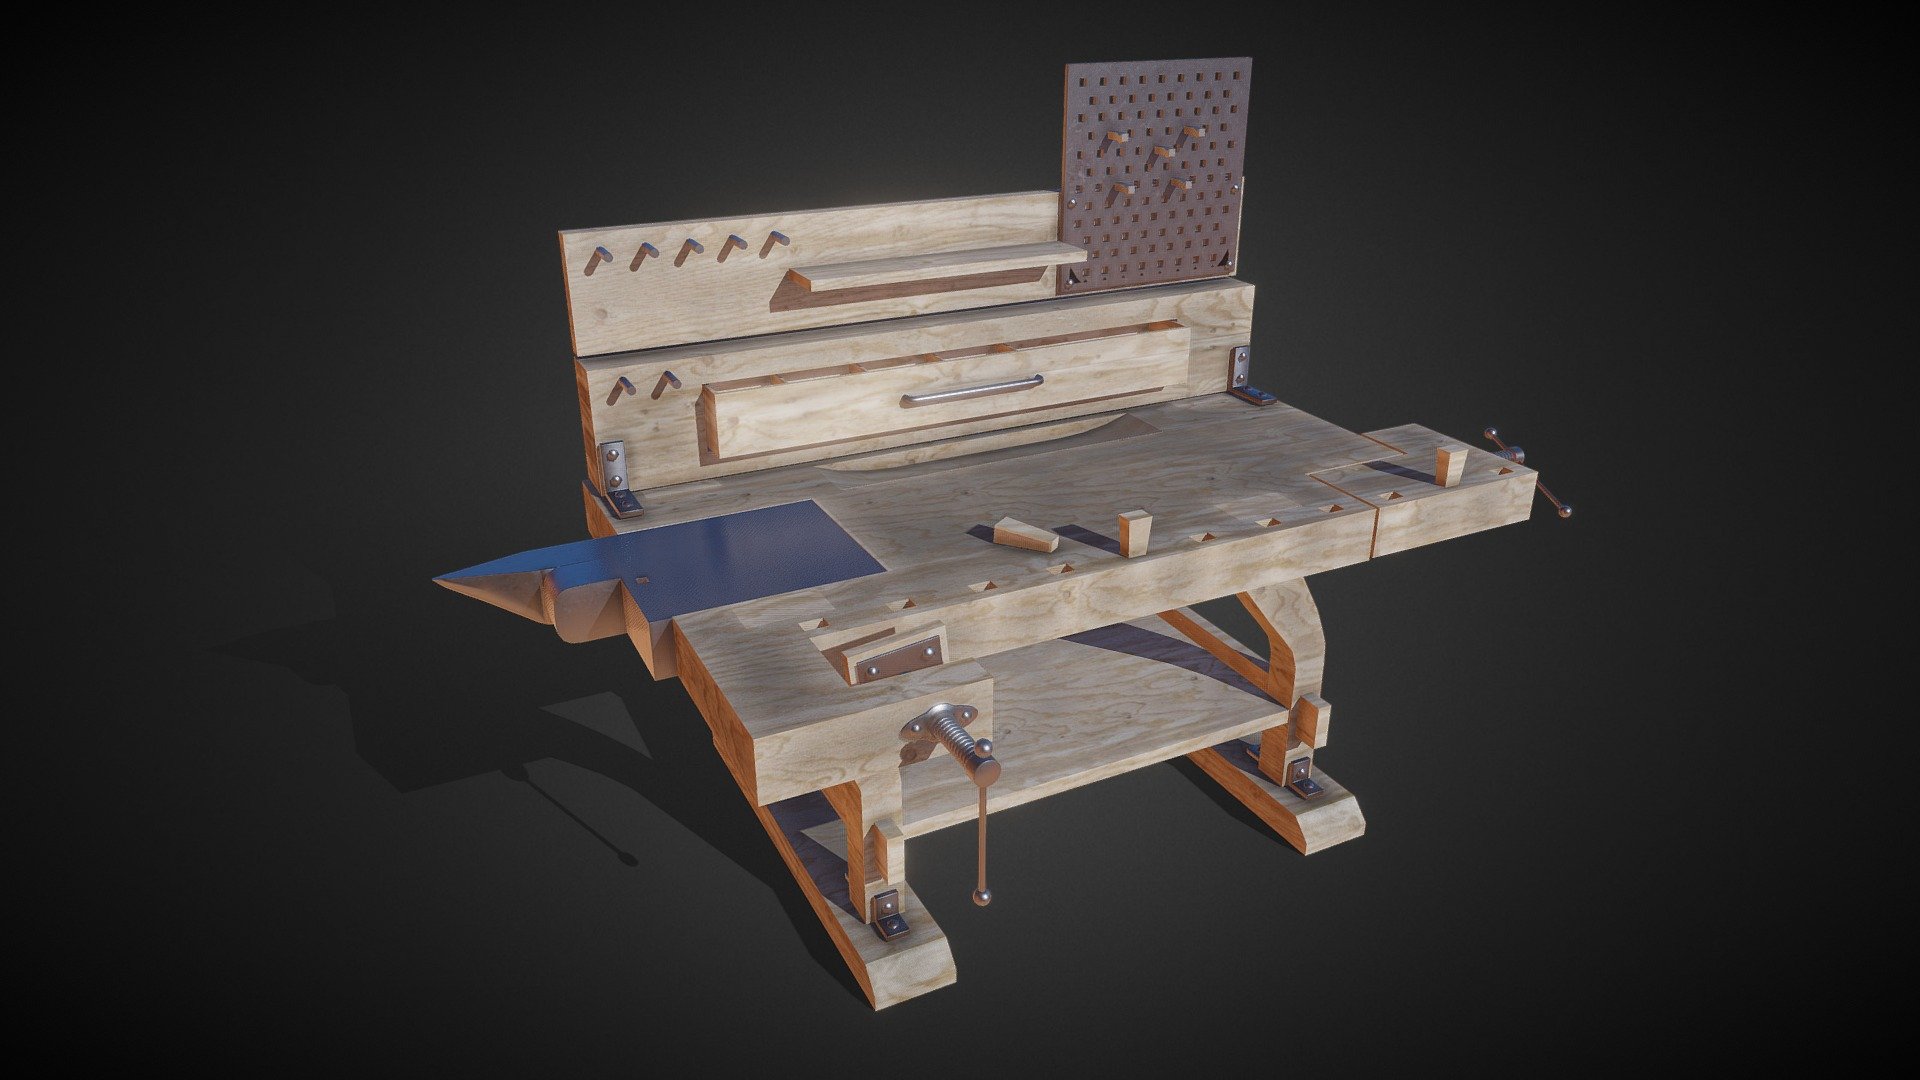 Lowpoly Crafting Table / Workbench. combined mesh, 3 materials 3d model